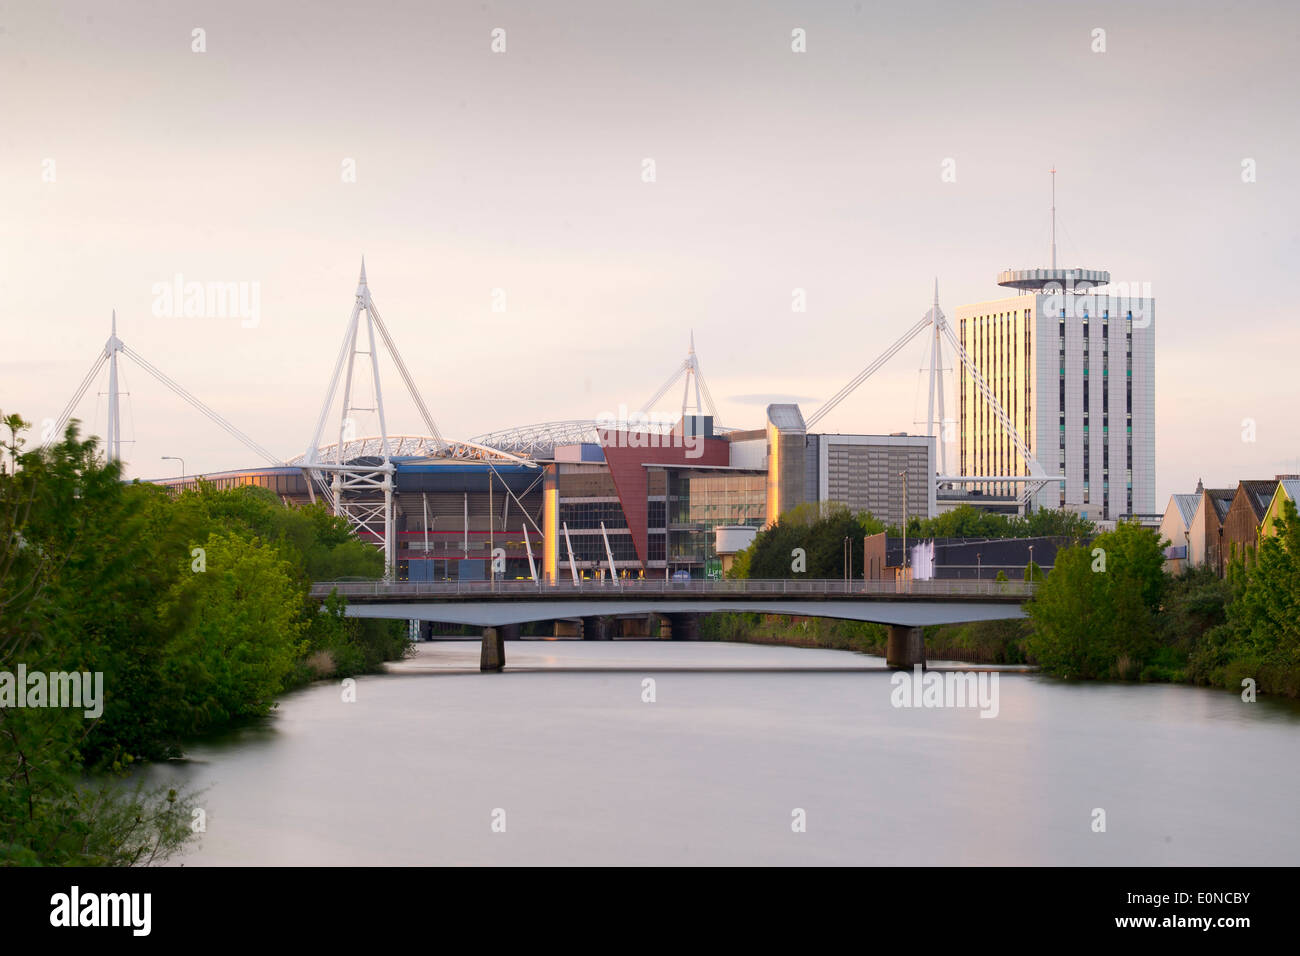 Cardiff City Centre at sunset showing the River Taff and Millennium Stadium. Stock Photo